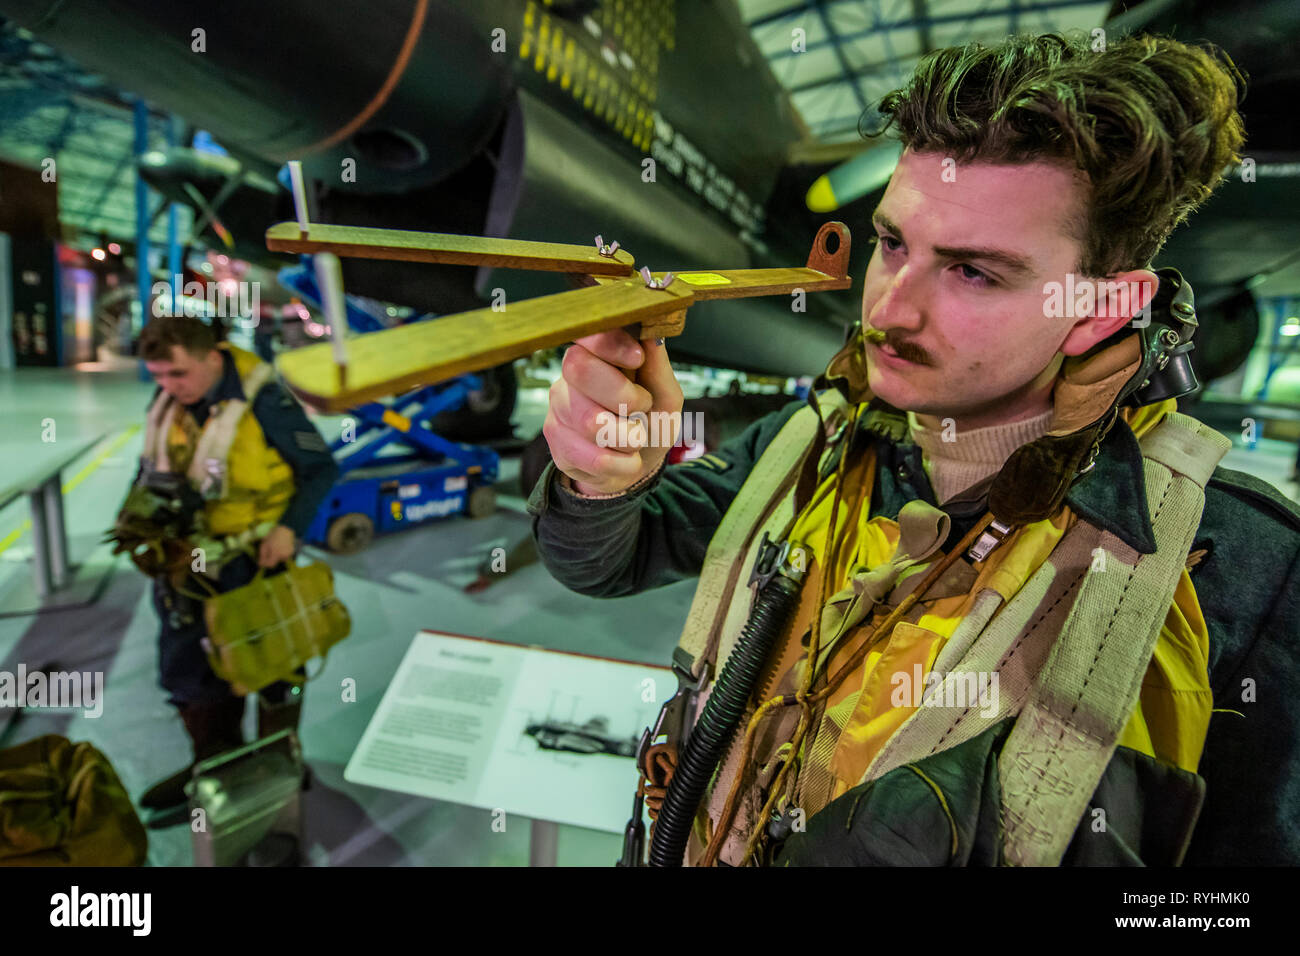 London, UK. 14th March, 2019. A re-enactor with a replica of the Dambuster aiming device in front of the Lancaster - Immersive Histories: Dambusters Virtual Reality Experience. An opportunity to step back in time to the early hours of 17 May 1943 and on board Avro Lancaster G-George to join the Dambusters on their legendary mission. Using the latest virtual reality and haptic technology, in conjunction with a physical 1:1 recreation of the interior of the iconic Avro Lancaster bomber. Credit: Guy Bell/Alamy Live News Credit: Guy Bell/Alamy Live News Stock Photo